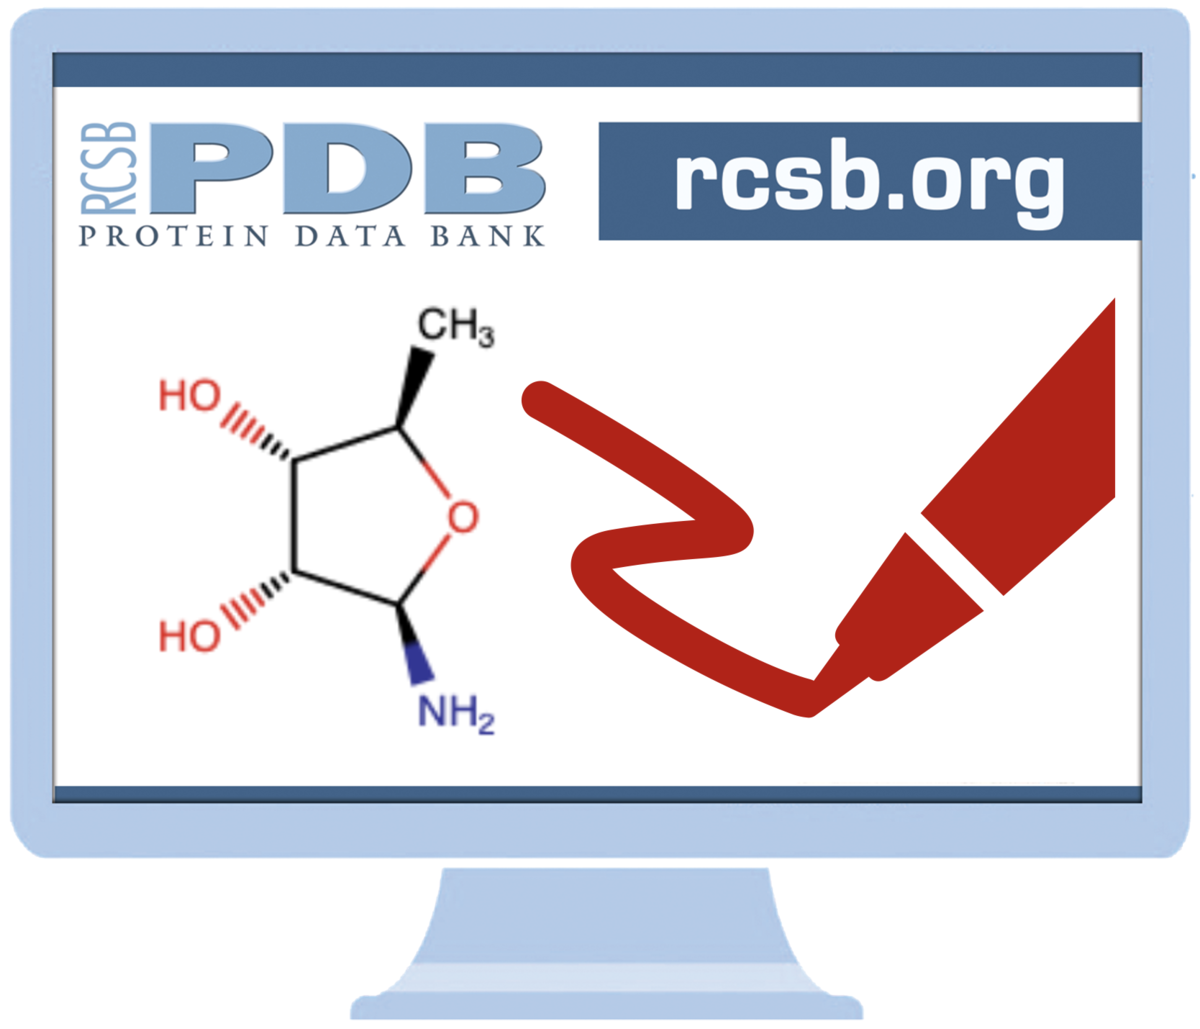 <a href="/chemical-sketch">Use the new Chemical Sketch Tool to build chemical drawings to search for small molecules in the PDB</a>